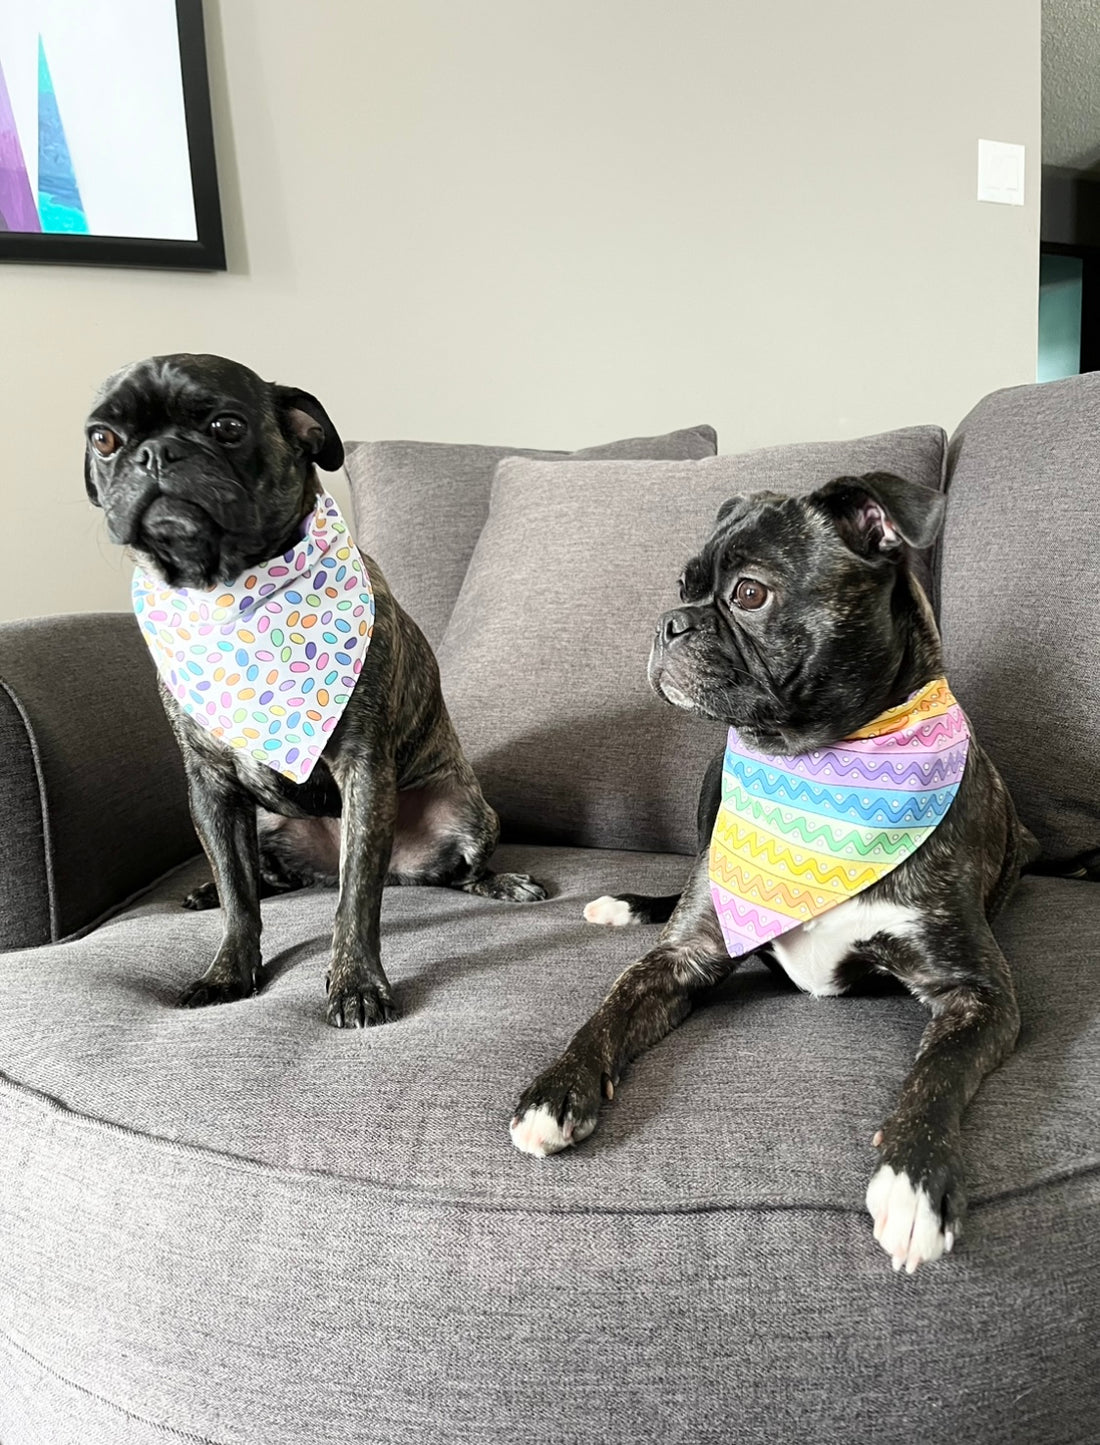 Rex and Roo, black Buggs wearing colorful Easter bandanas